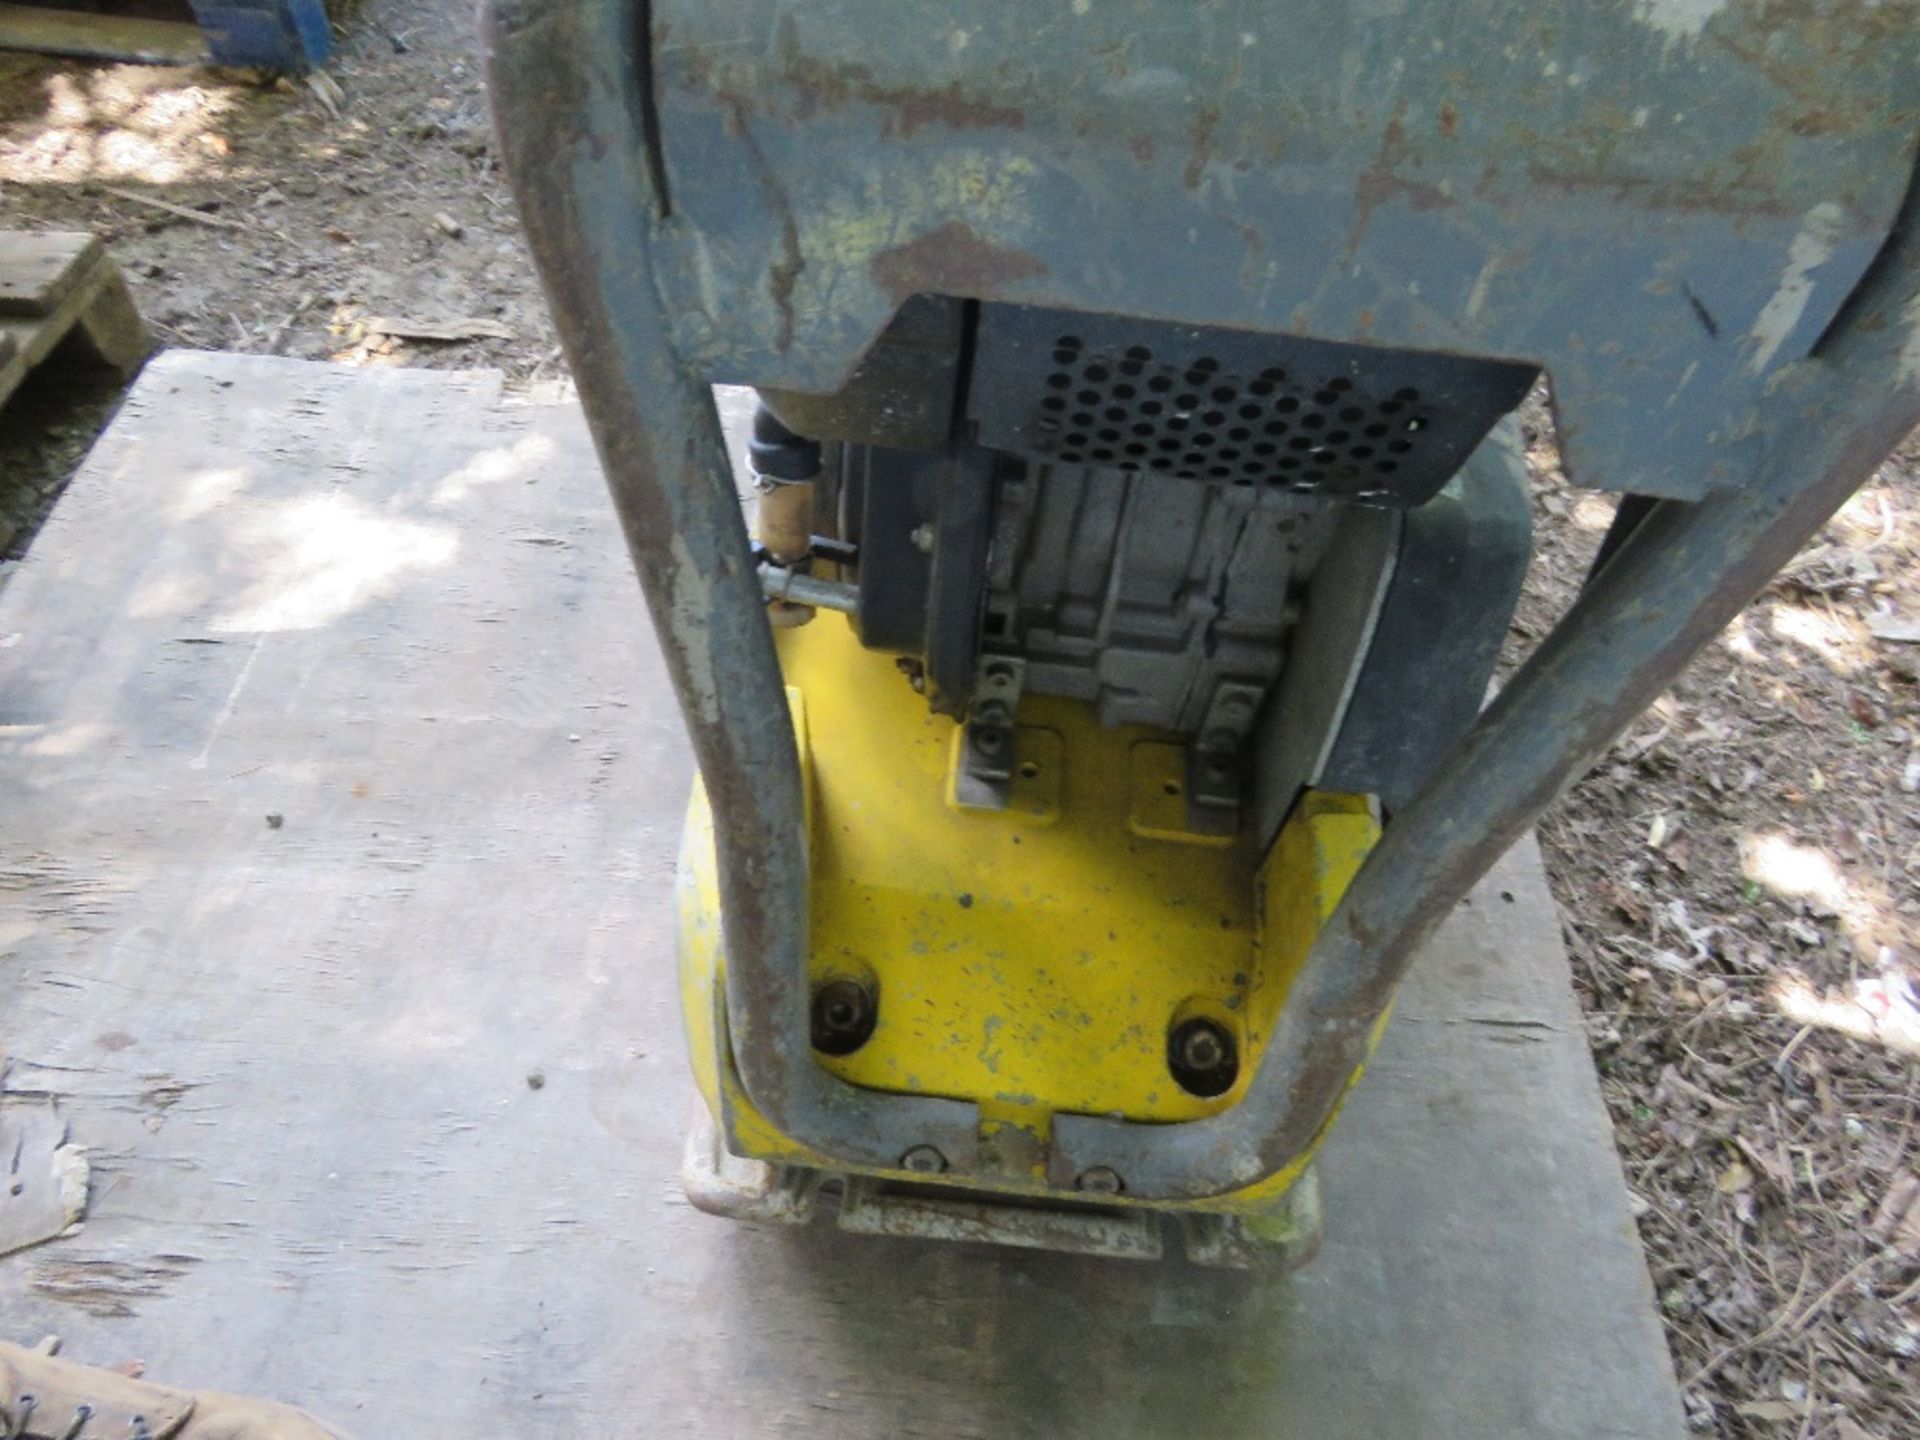 WACKER NEUSON DIESEL ENGINED COMPACTION PLATE. DIRECT FROM A LOCAL GROUNDWORKS COMPANY AS PART OF - Image 4 of 4